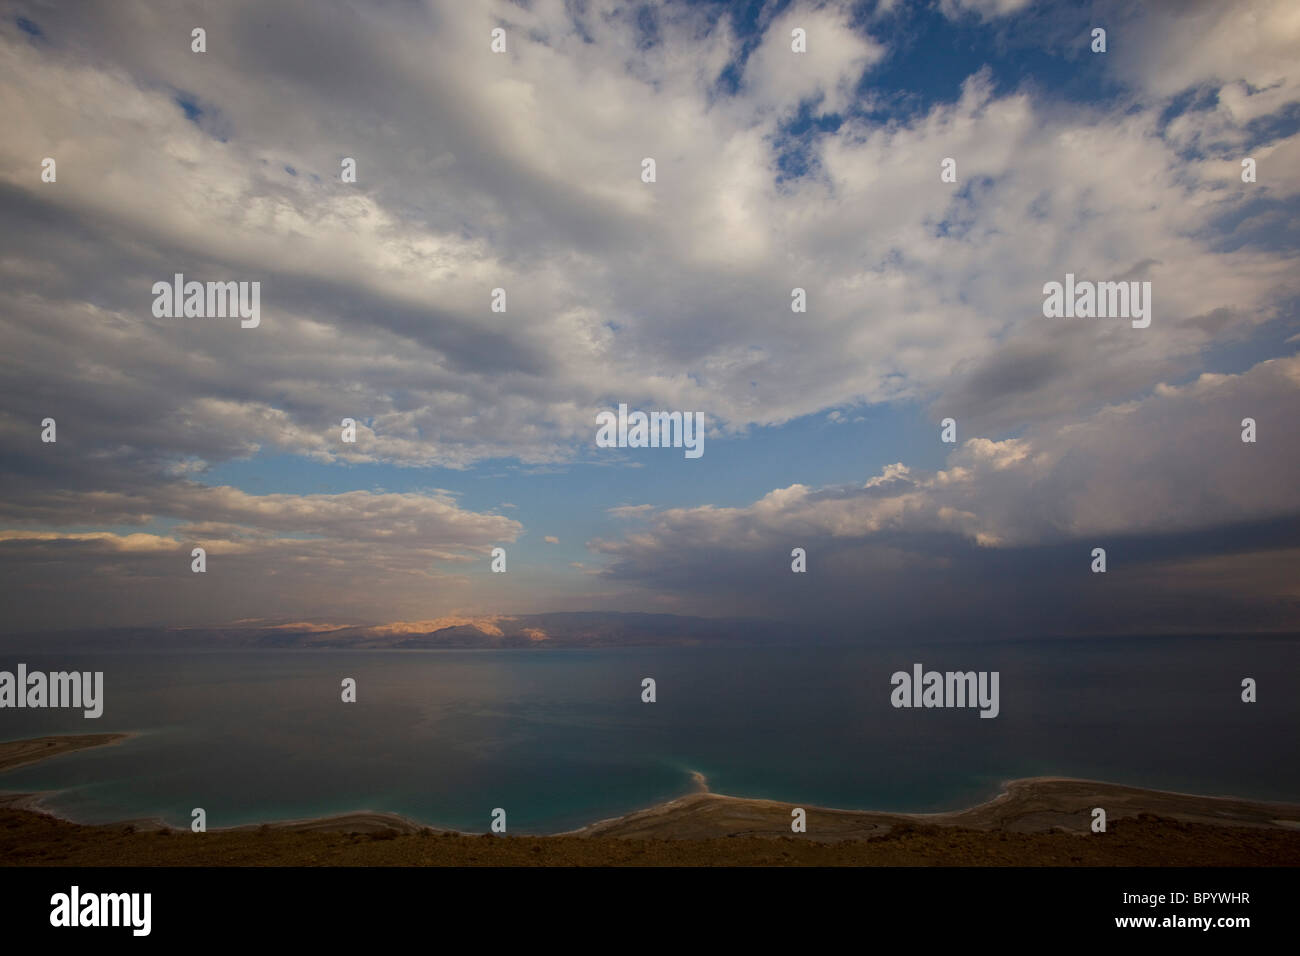 Photograph of the cloudy sky over the Dead Sea Stock Photo